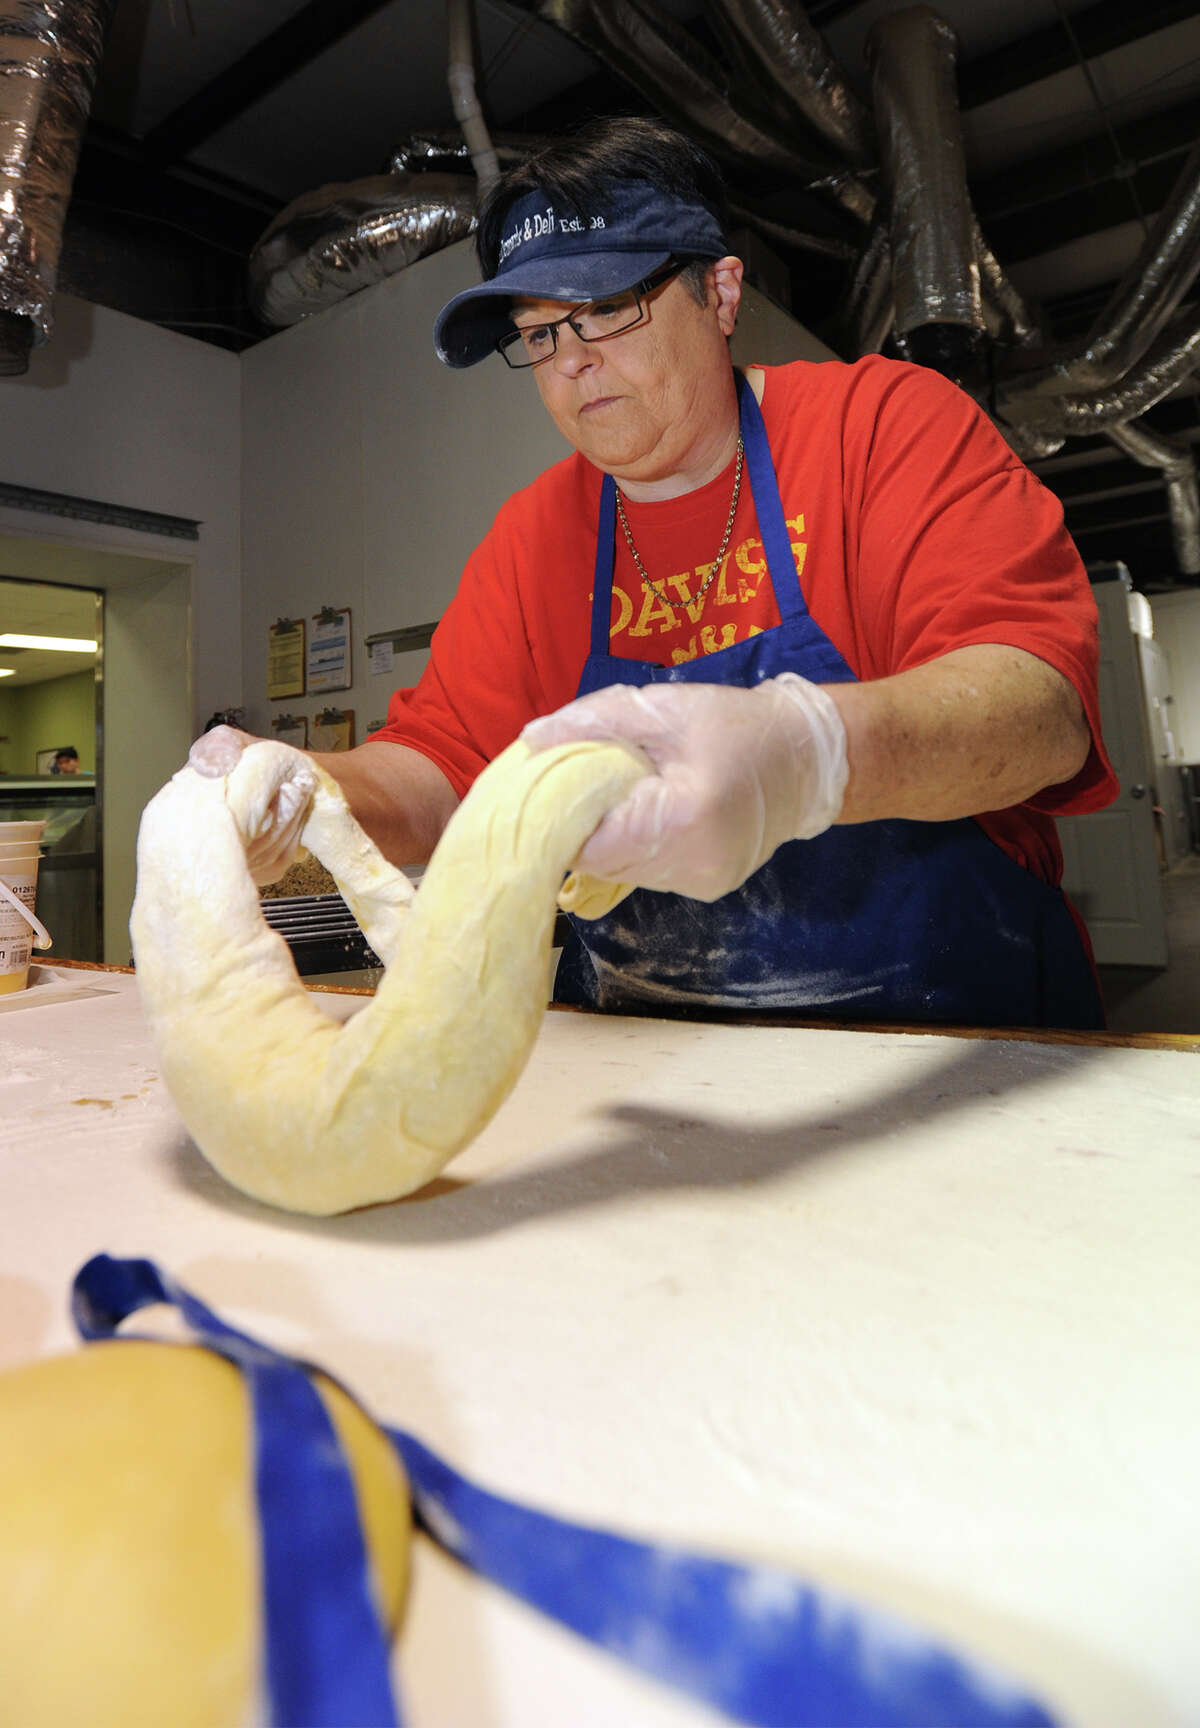 Tracey Beckcom prepares a boudin king cake at Daviss Donuts in Nederland on Wednesday. Beckcom uses a traditional dough then adds boudin, cheese and a bacony syrup topping. Beckcom added that she has made around 60 boudin cakes this year. Photo taken Wednesday, February 04, 2015 Guiseppe Barranco/The Enterprise